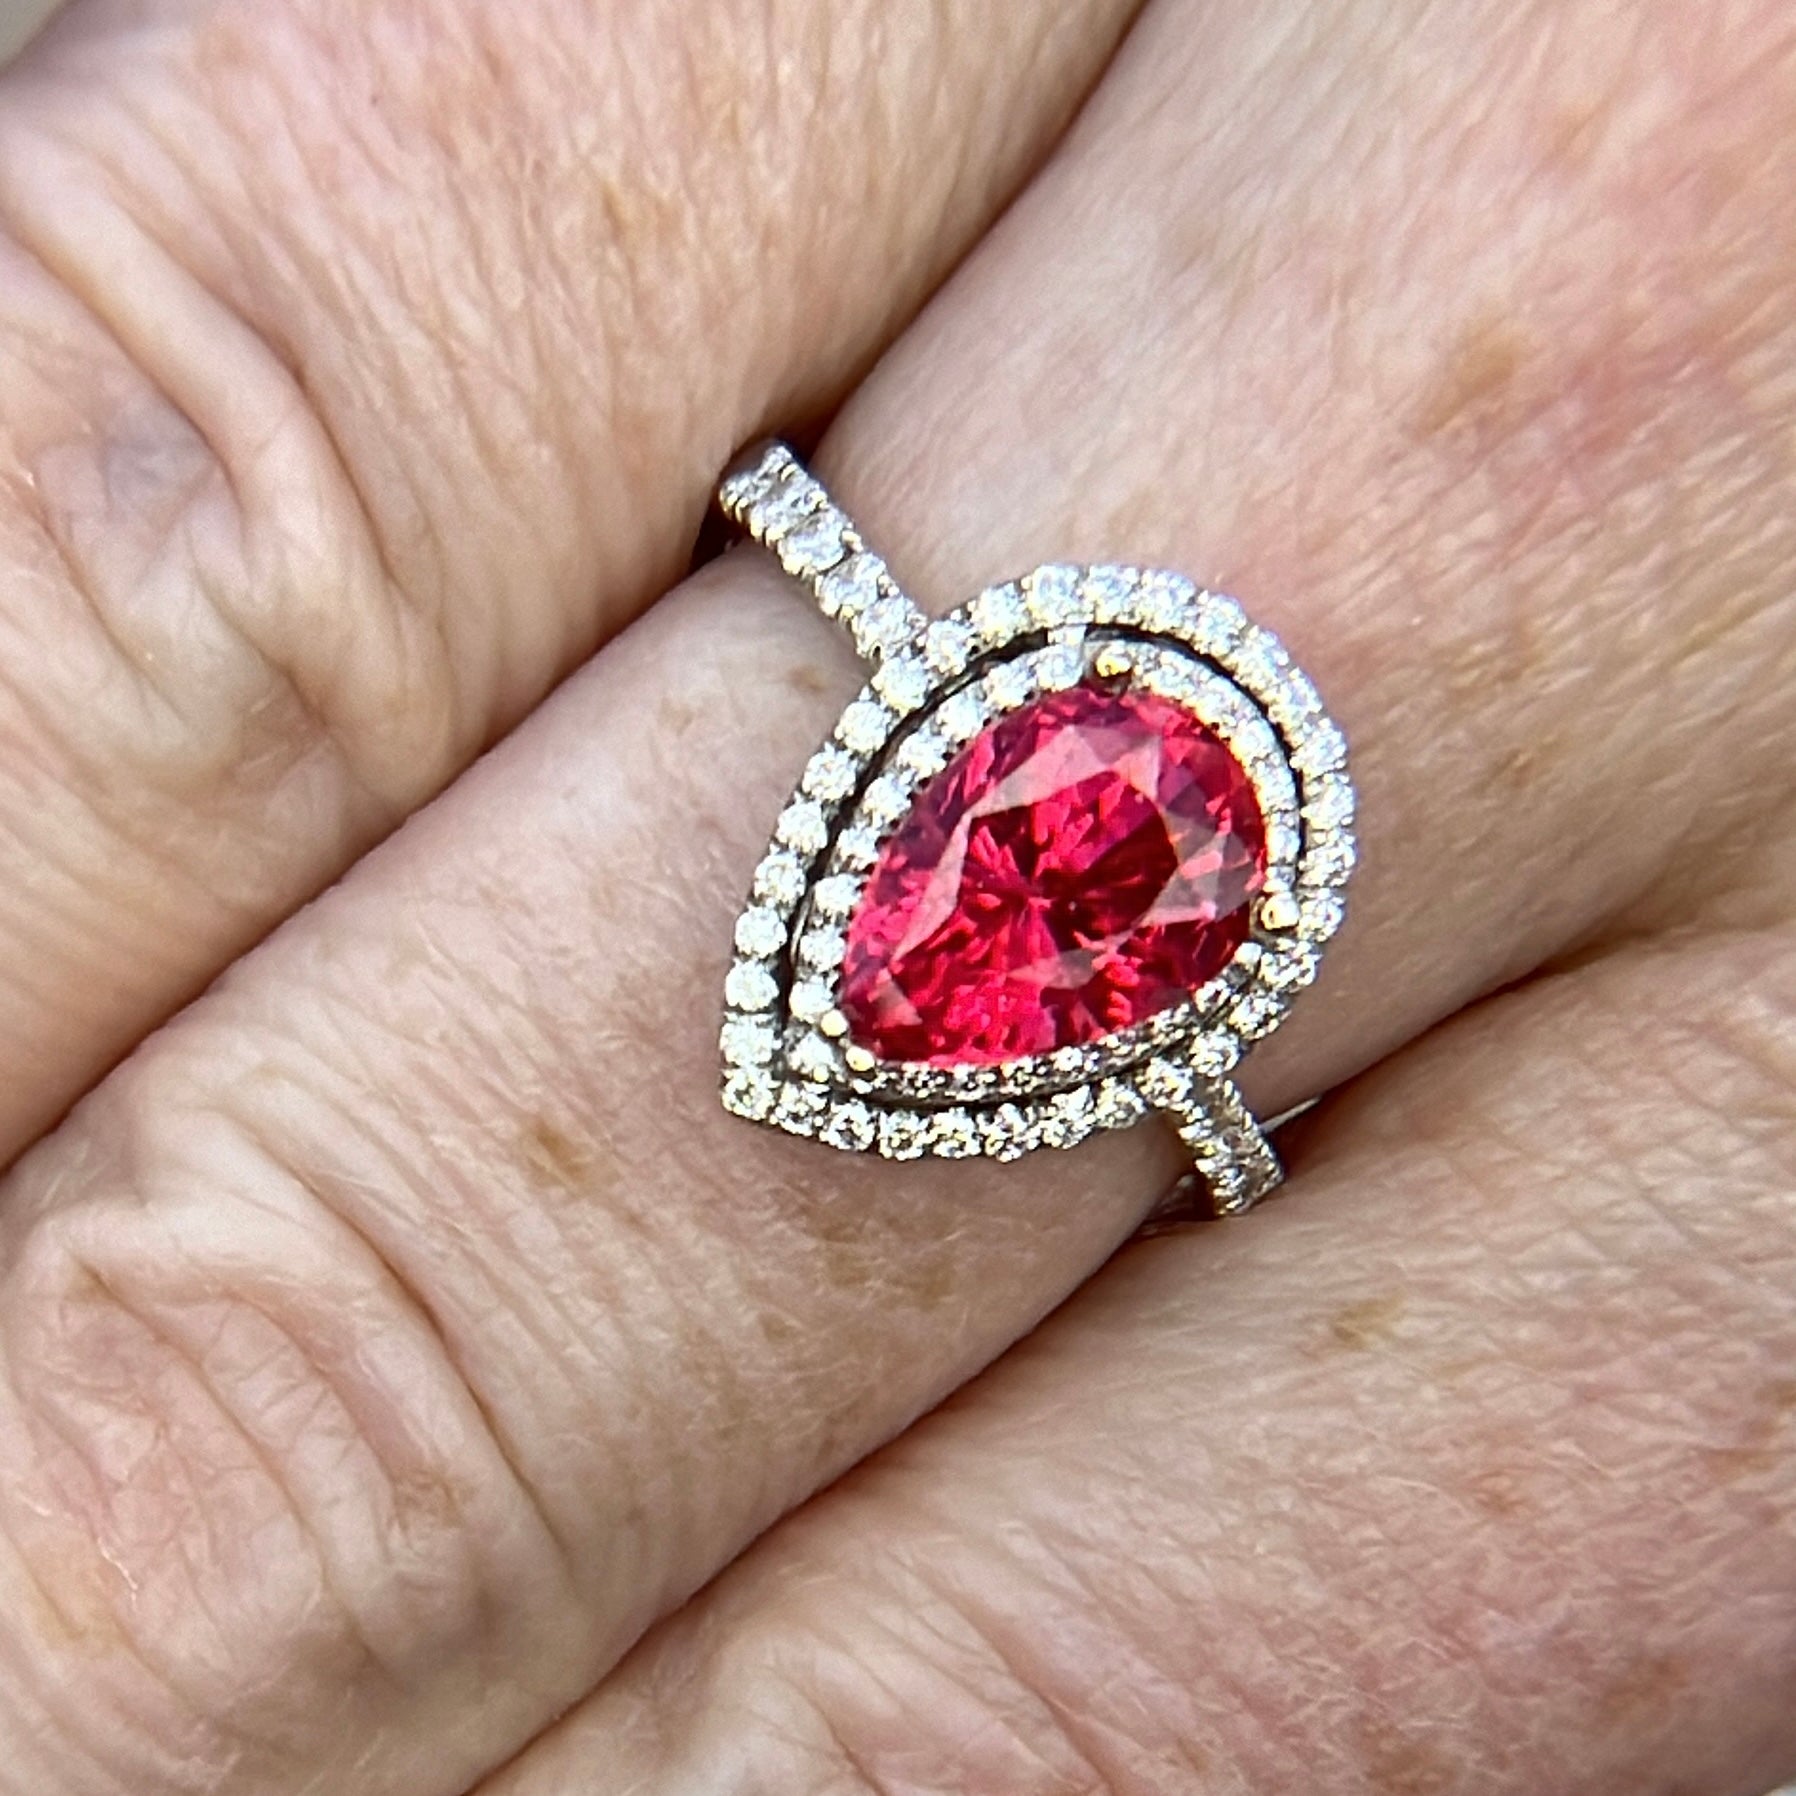 Exceptional pinkish red mahenge spinel ring in white gold with a similar color to a Jedi spinel 